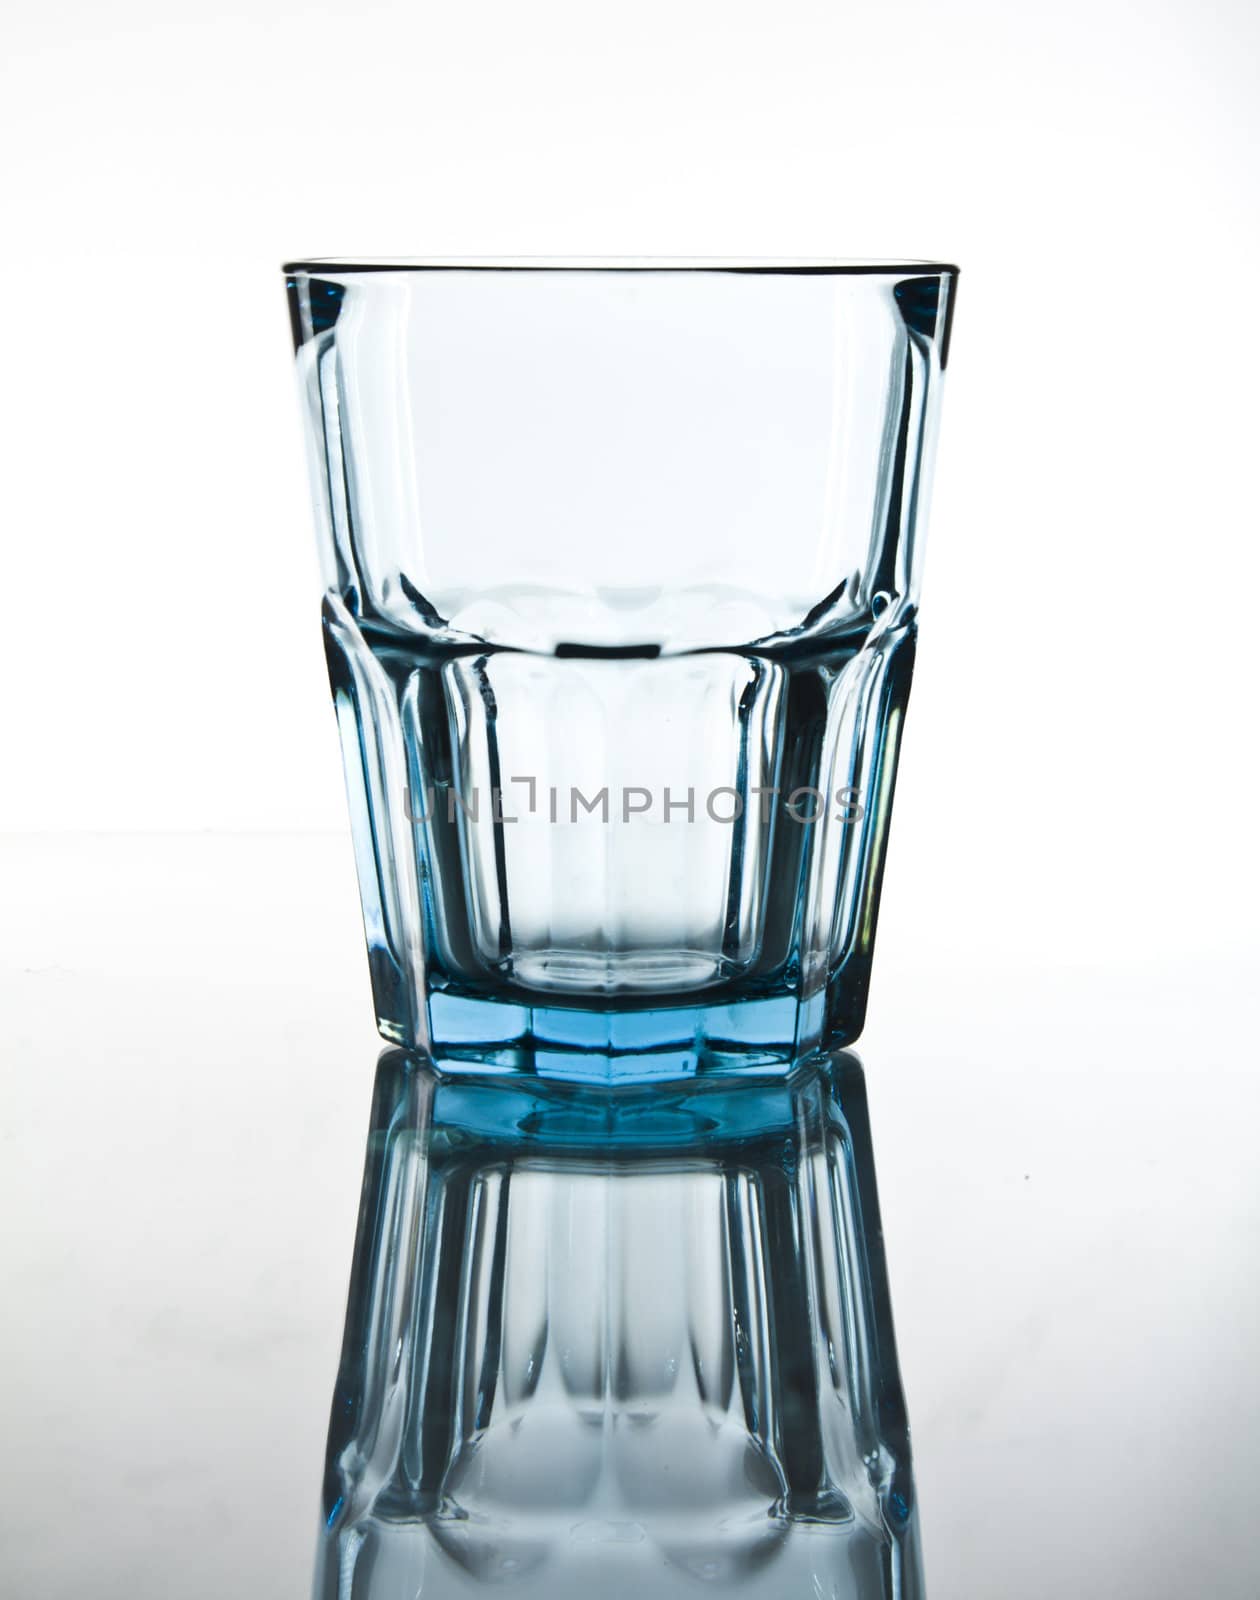 blue glass on white background with reflection